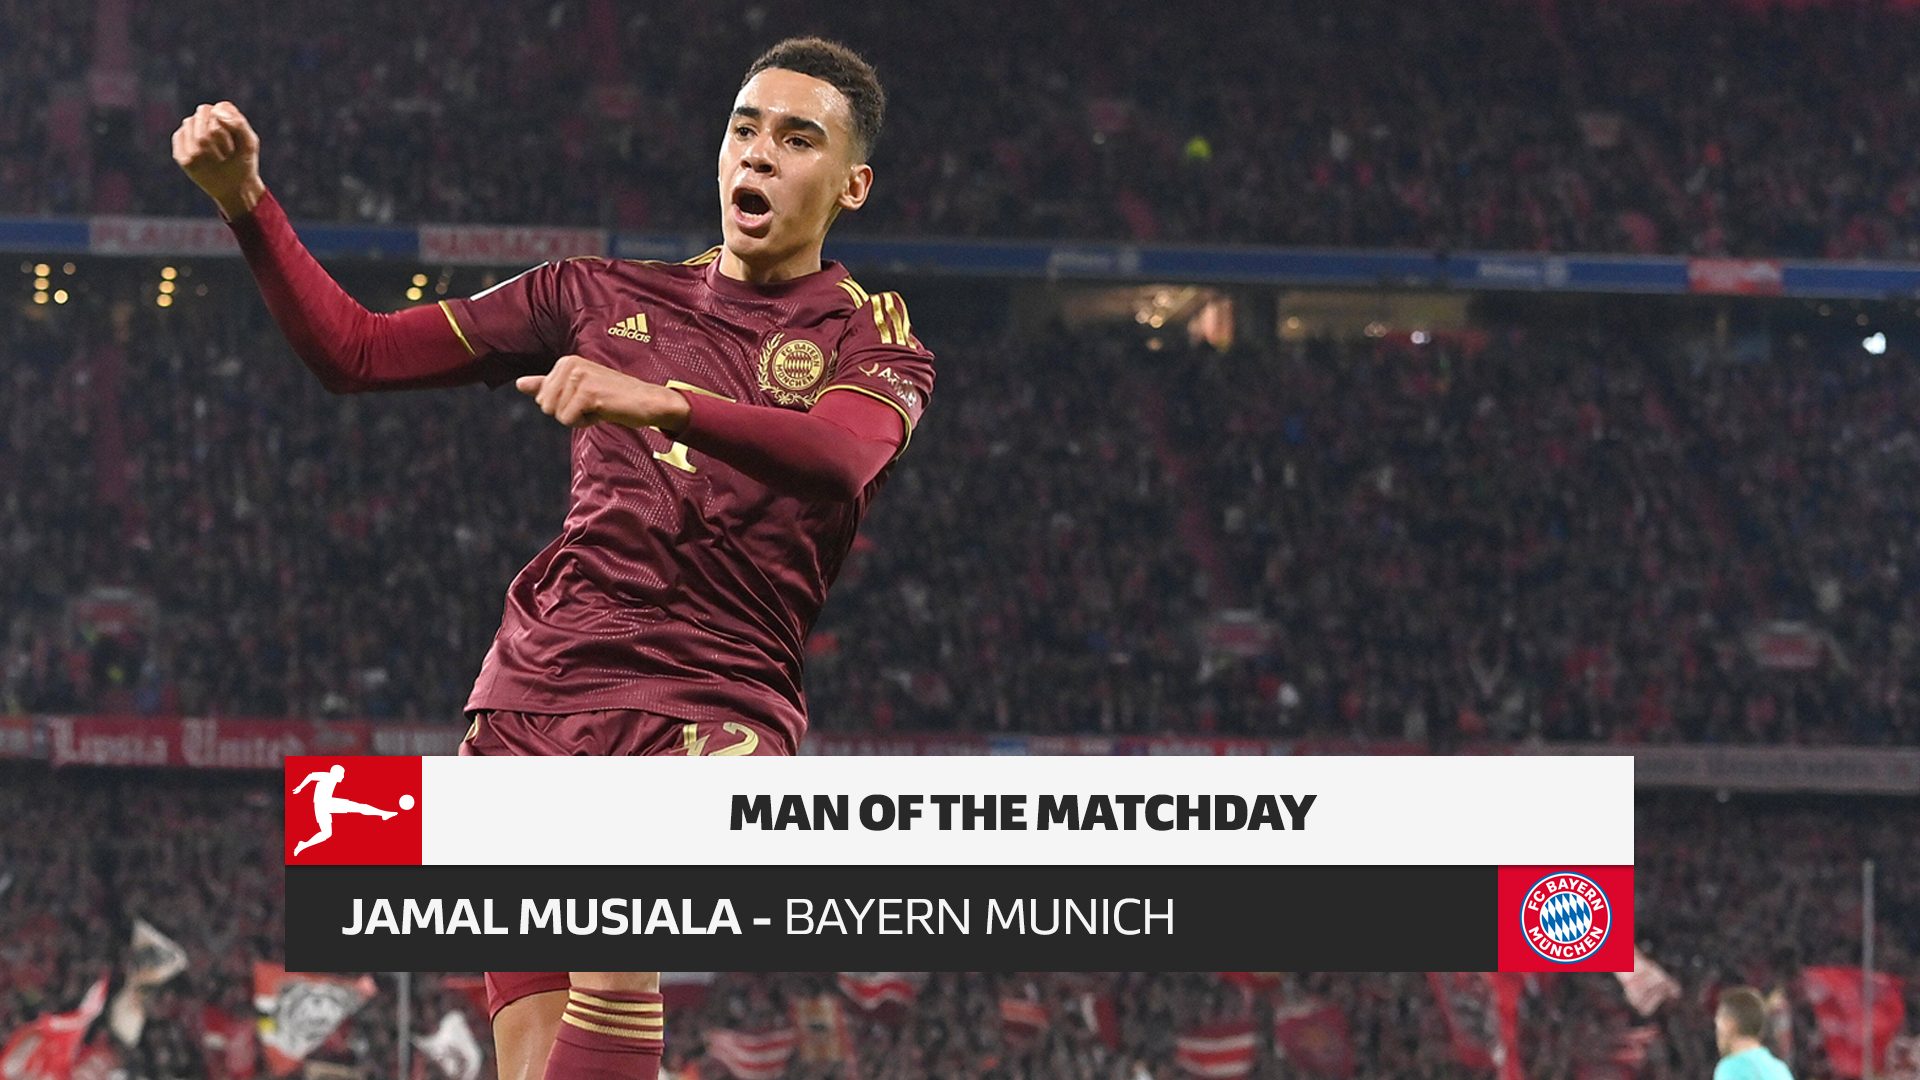 Jamal Musiala: MD8's Man of the Matchday putting fire in Bayern Munich's belly